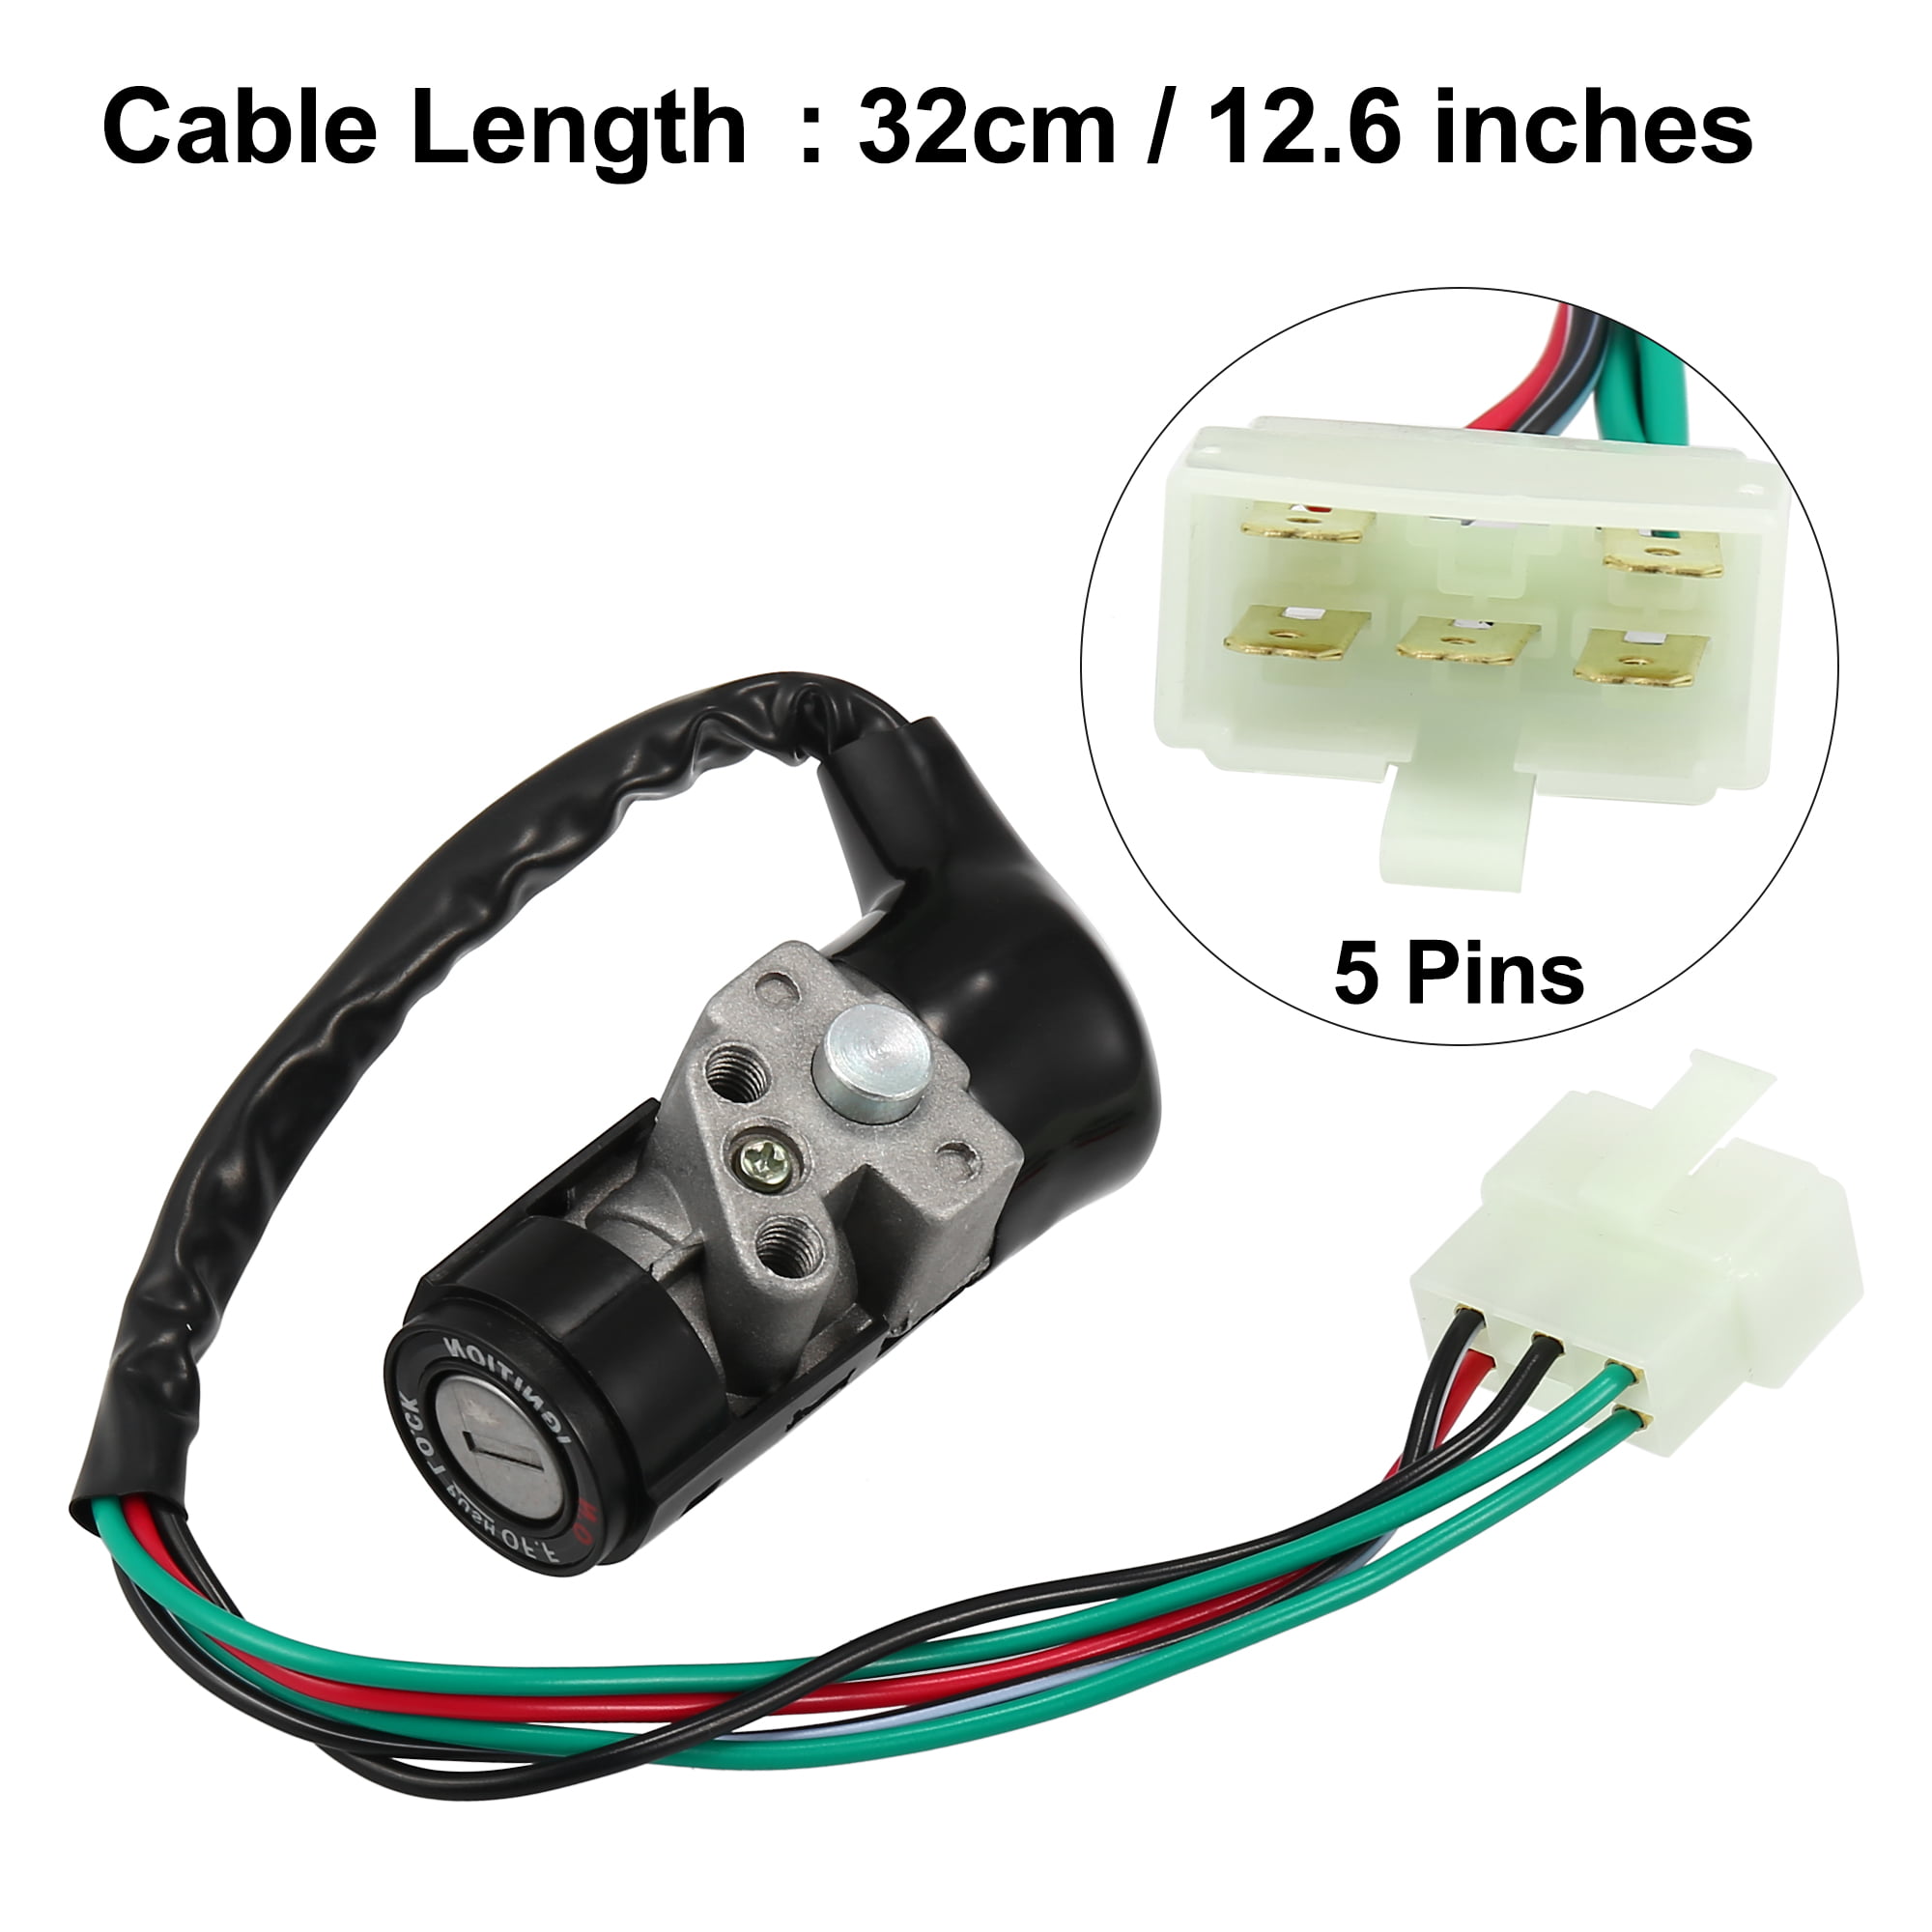 Ignition Switch Lock W/Key 2 Wire Two Position Replacement For E-Bike & Stickers 